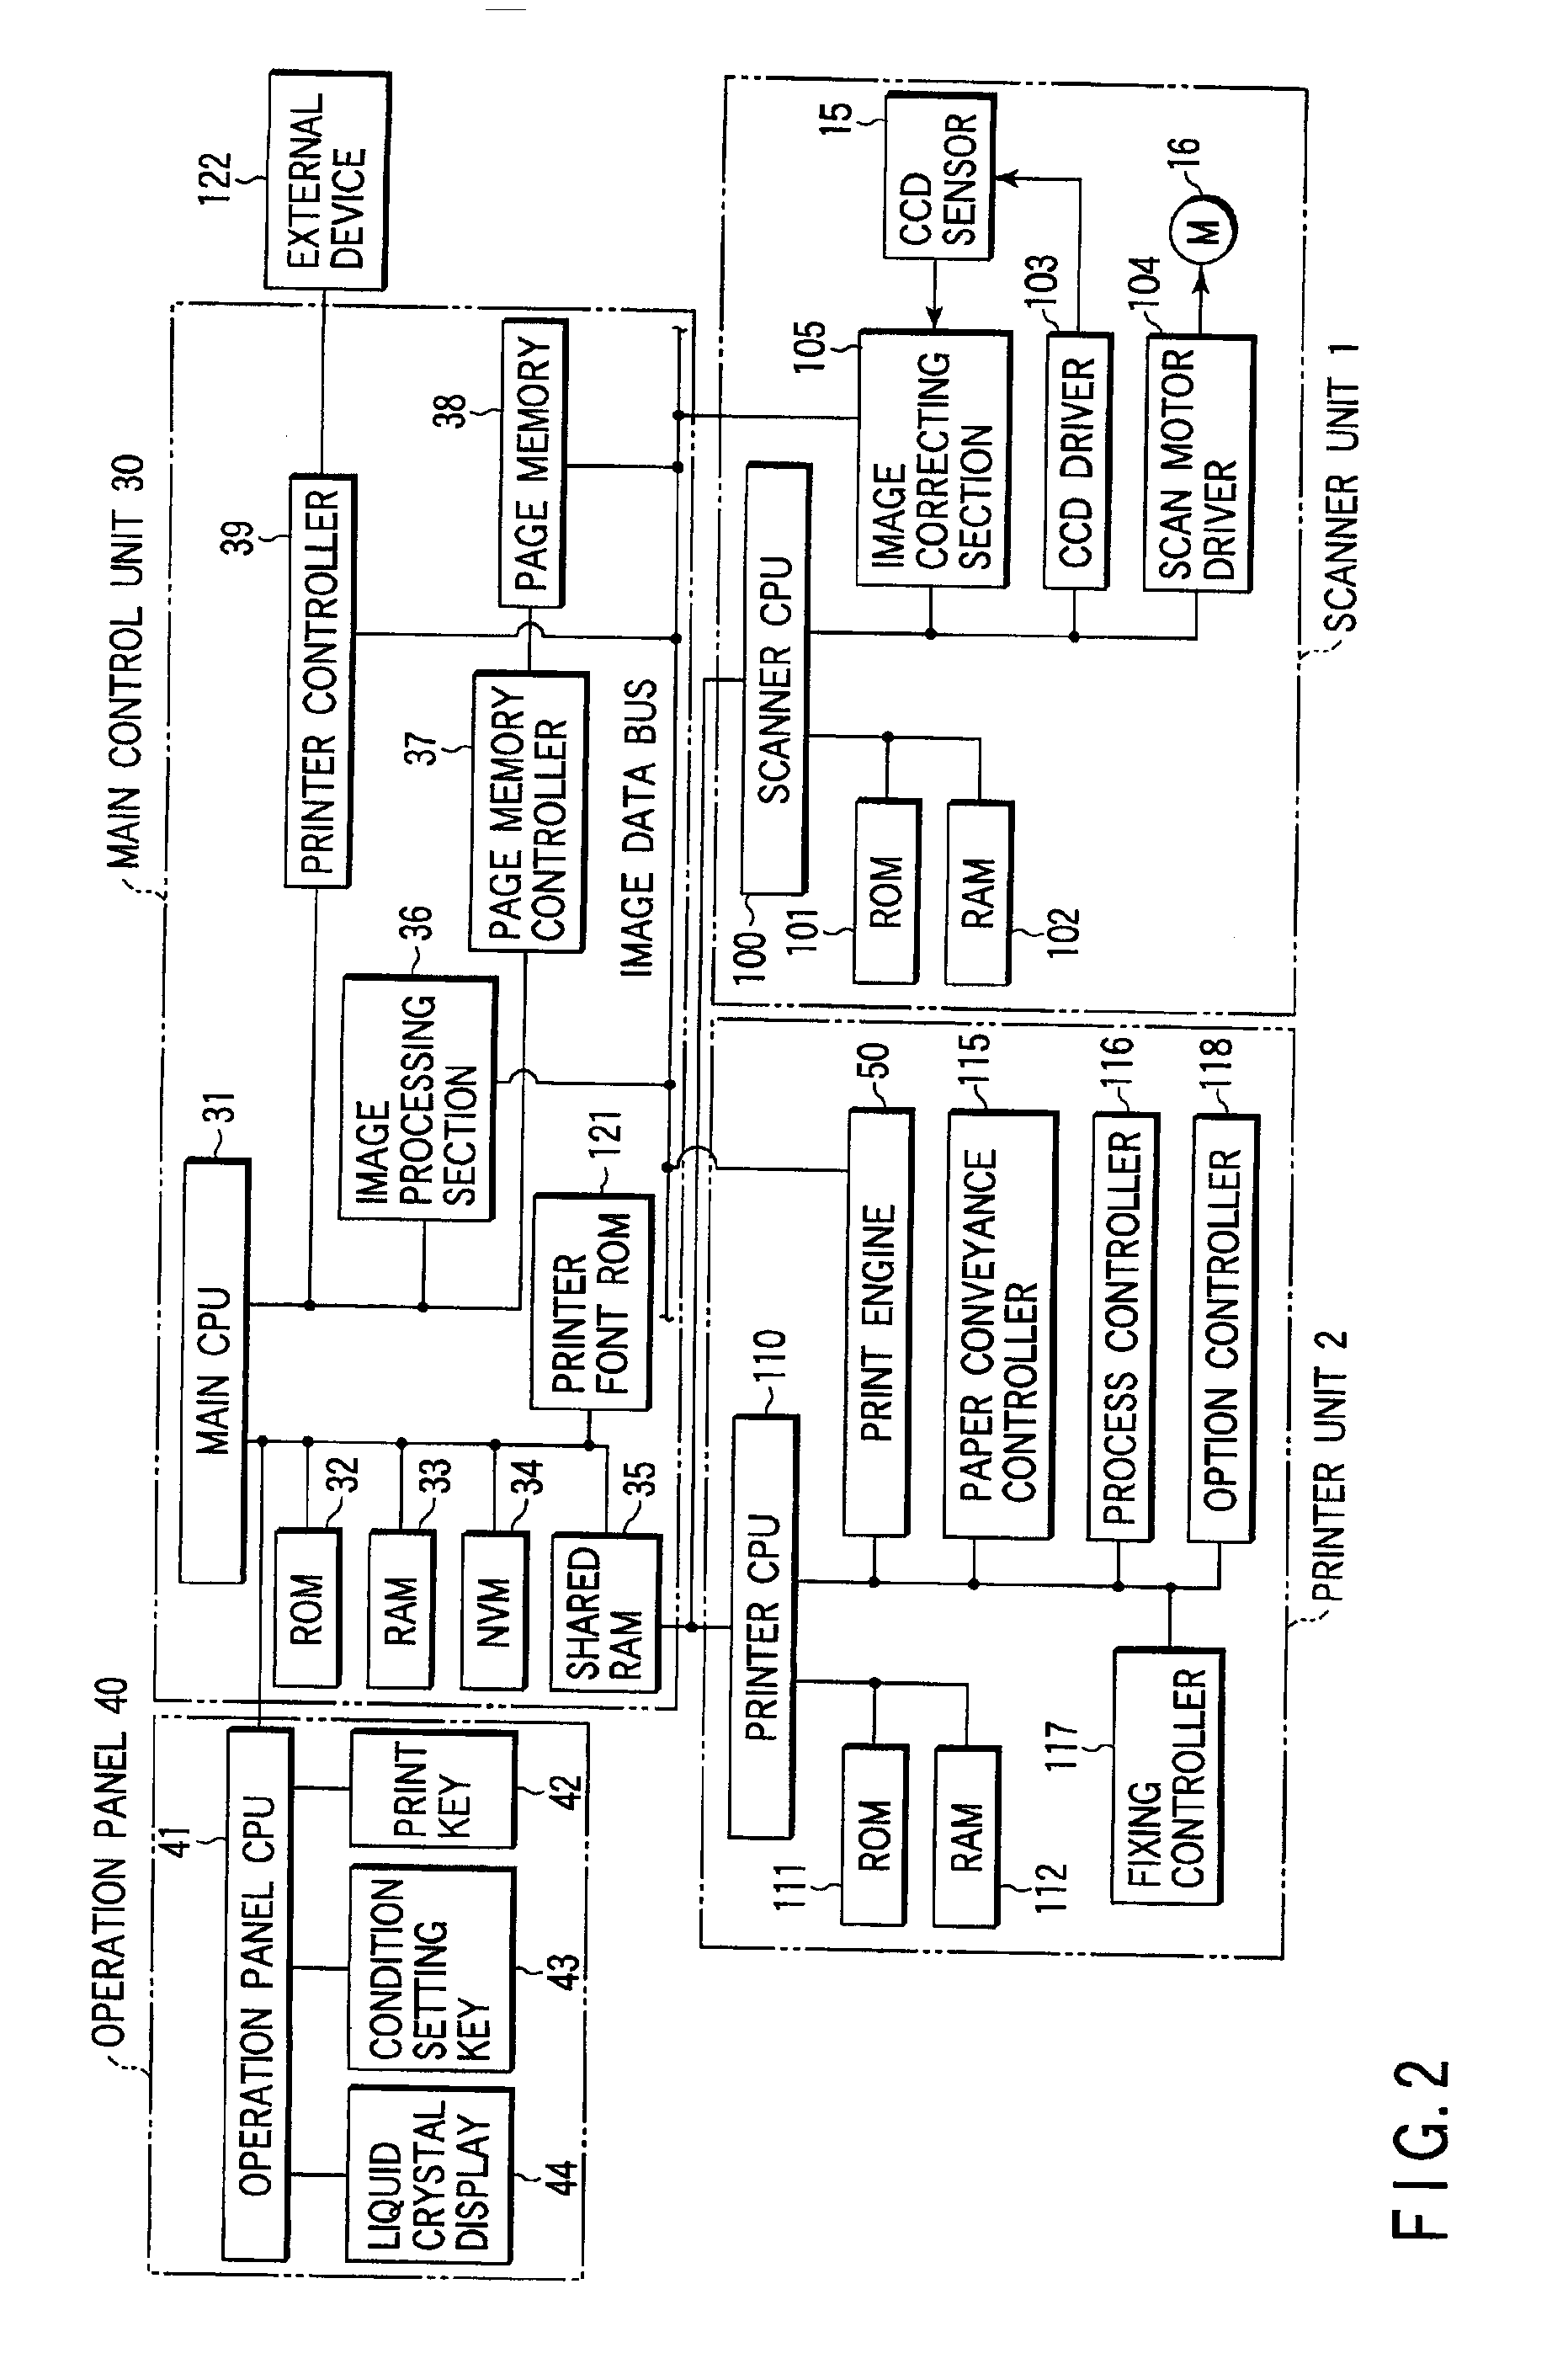 Image forming system with scanner capable of changing magnification of scanned image